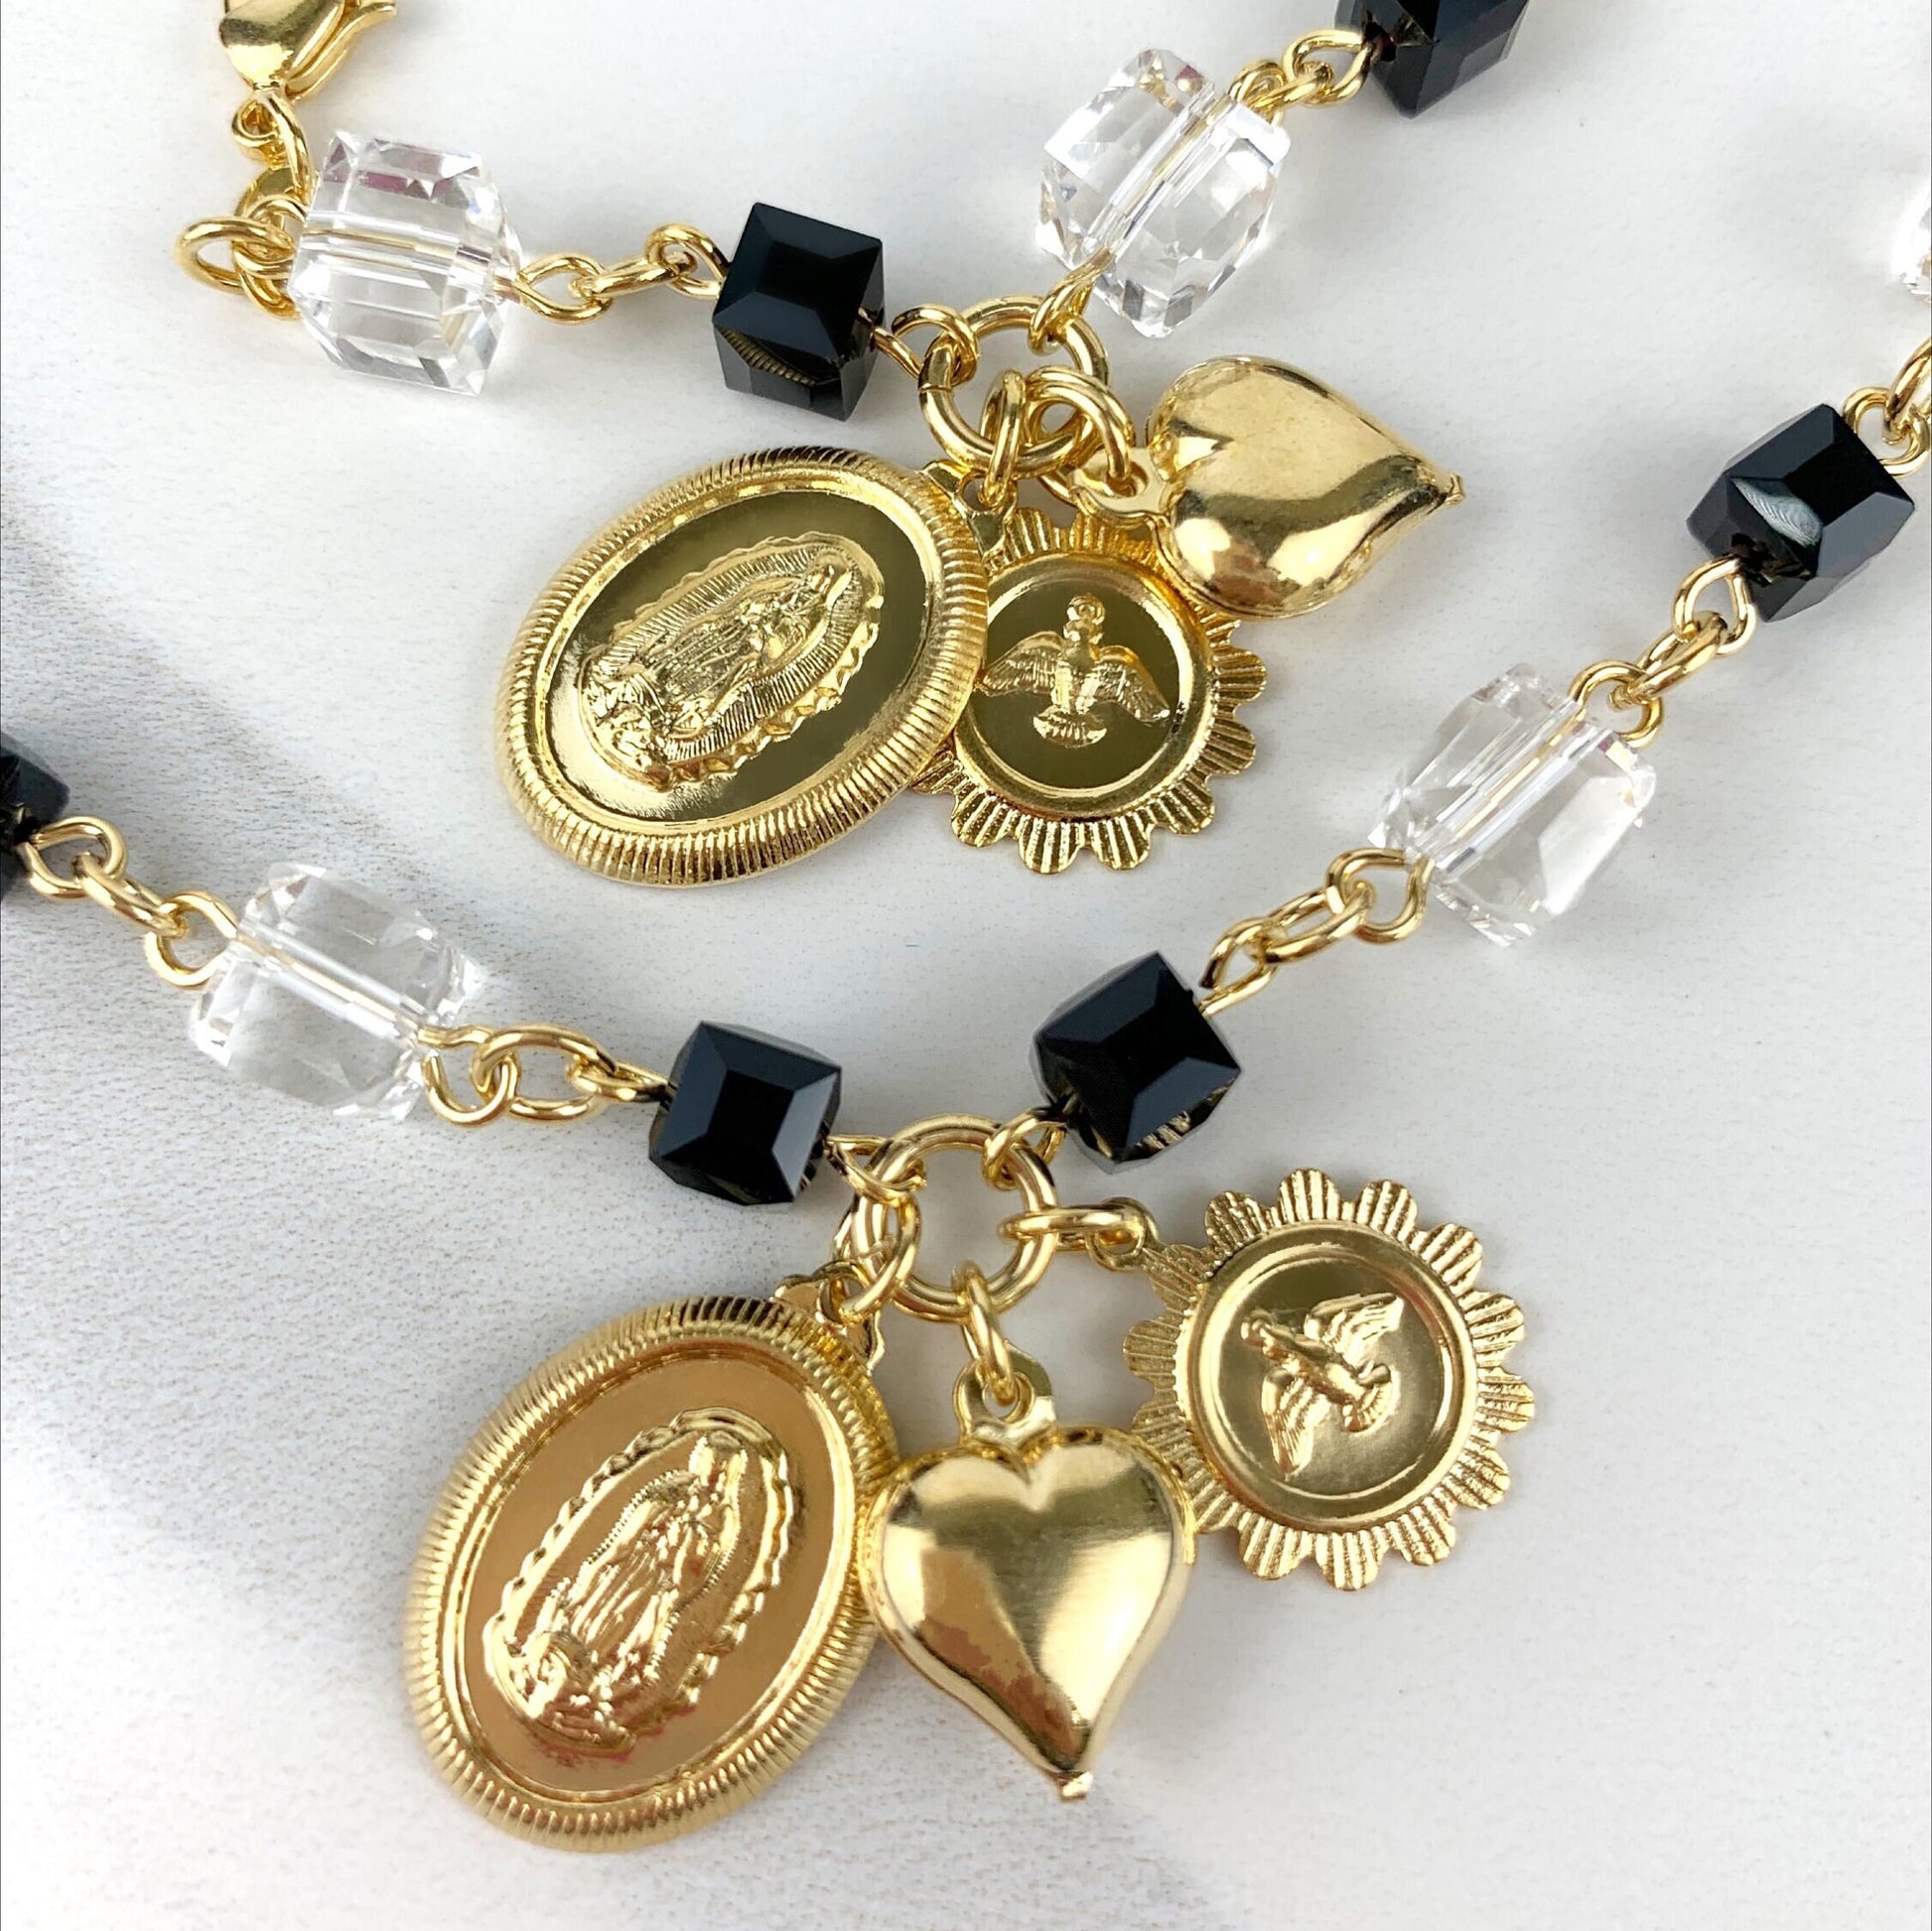 18k Gold Filled Black and Clear Beads Guadalupe Virgin, Dove of Peace, Puffy Heart Charms Necklace and Bracelet Set Wholesale Jewelry